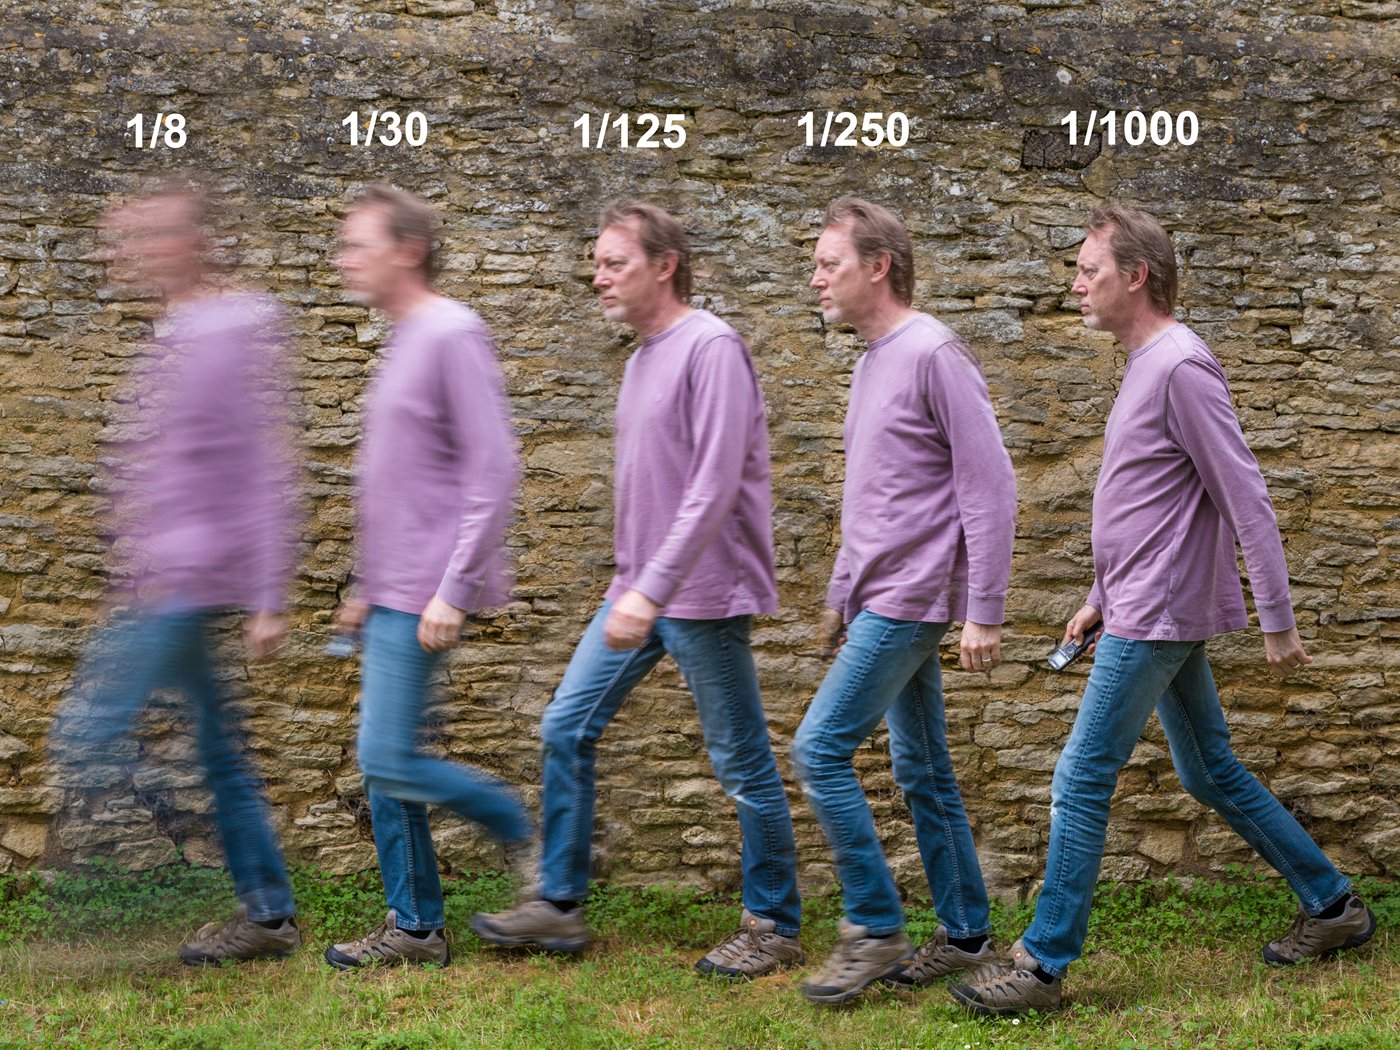 Effects of different shutter speeds of a man walking for time-lapse photography settings